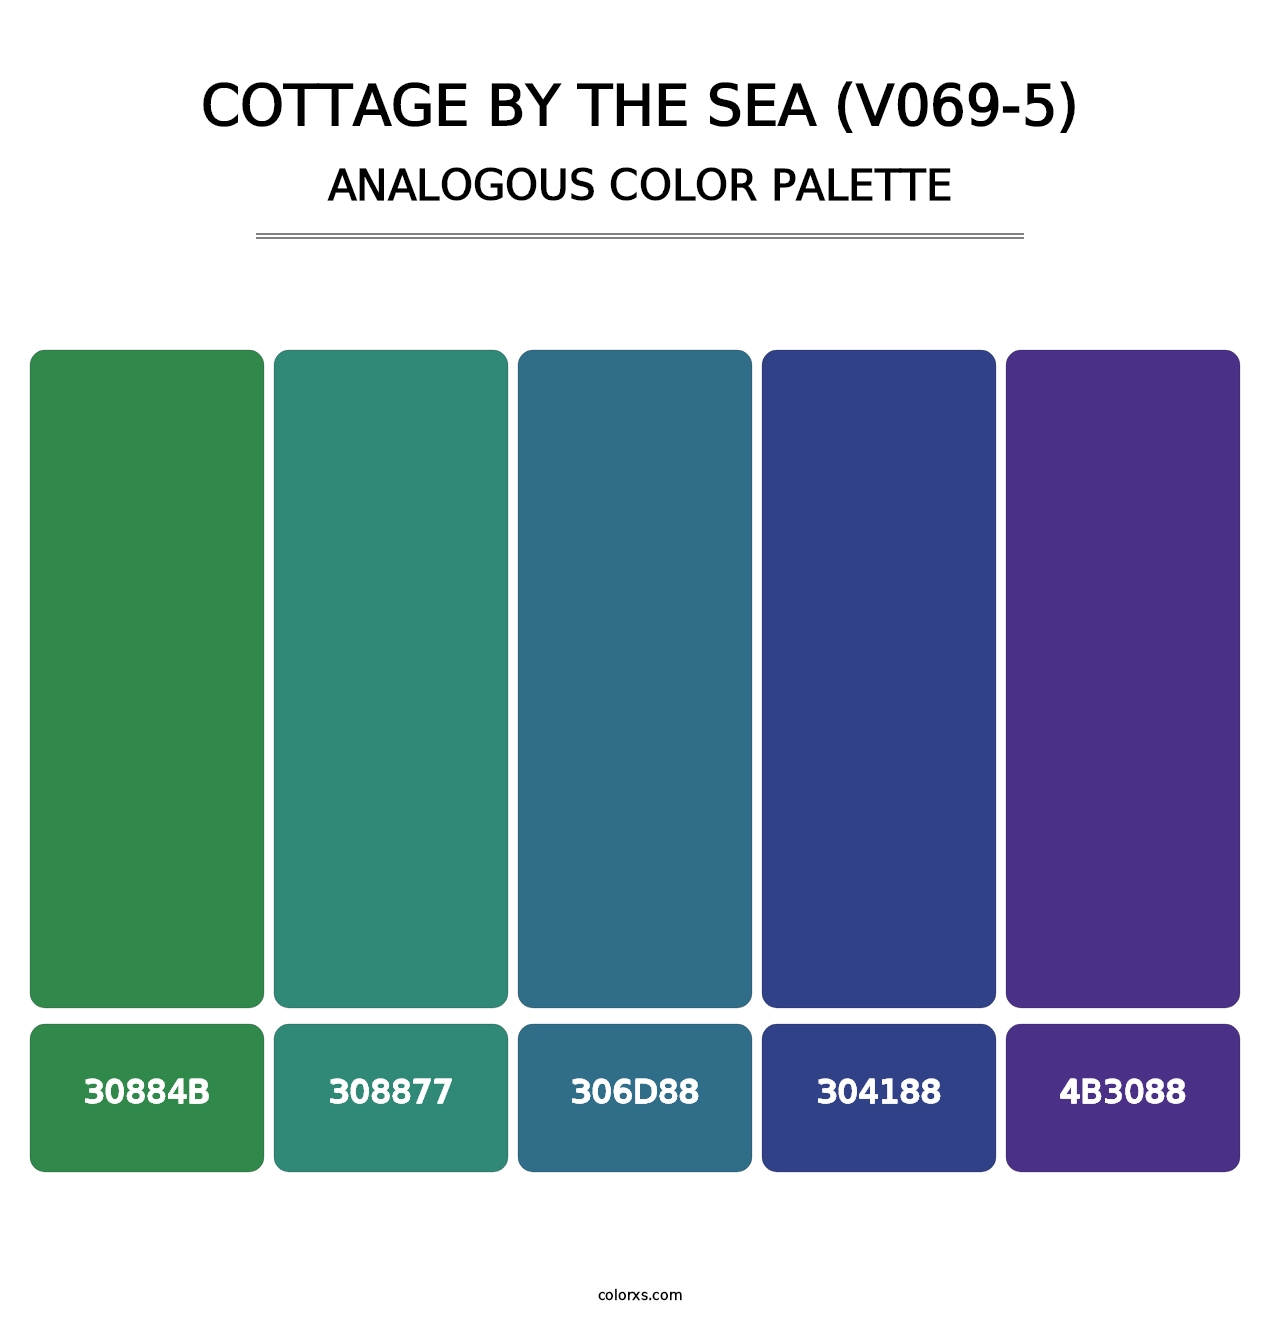 Cottage by the Sea (V069-5) - Analogous Color Palette